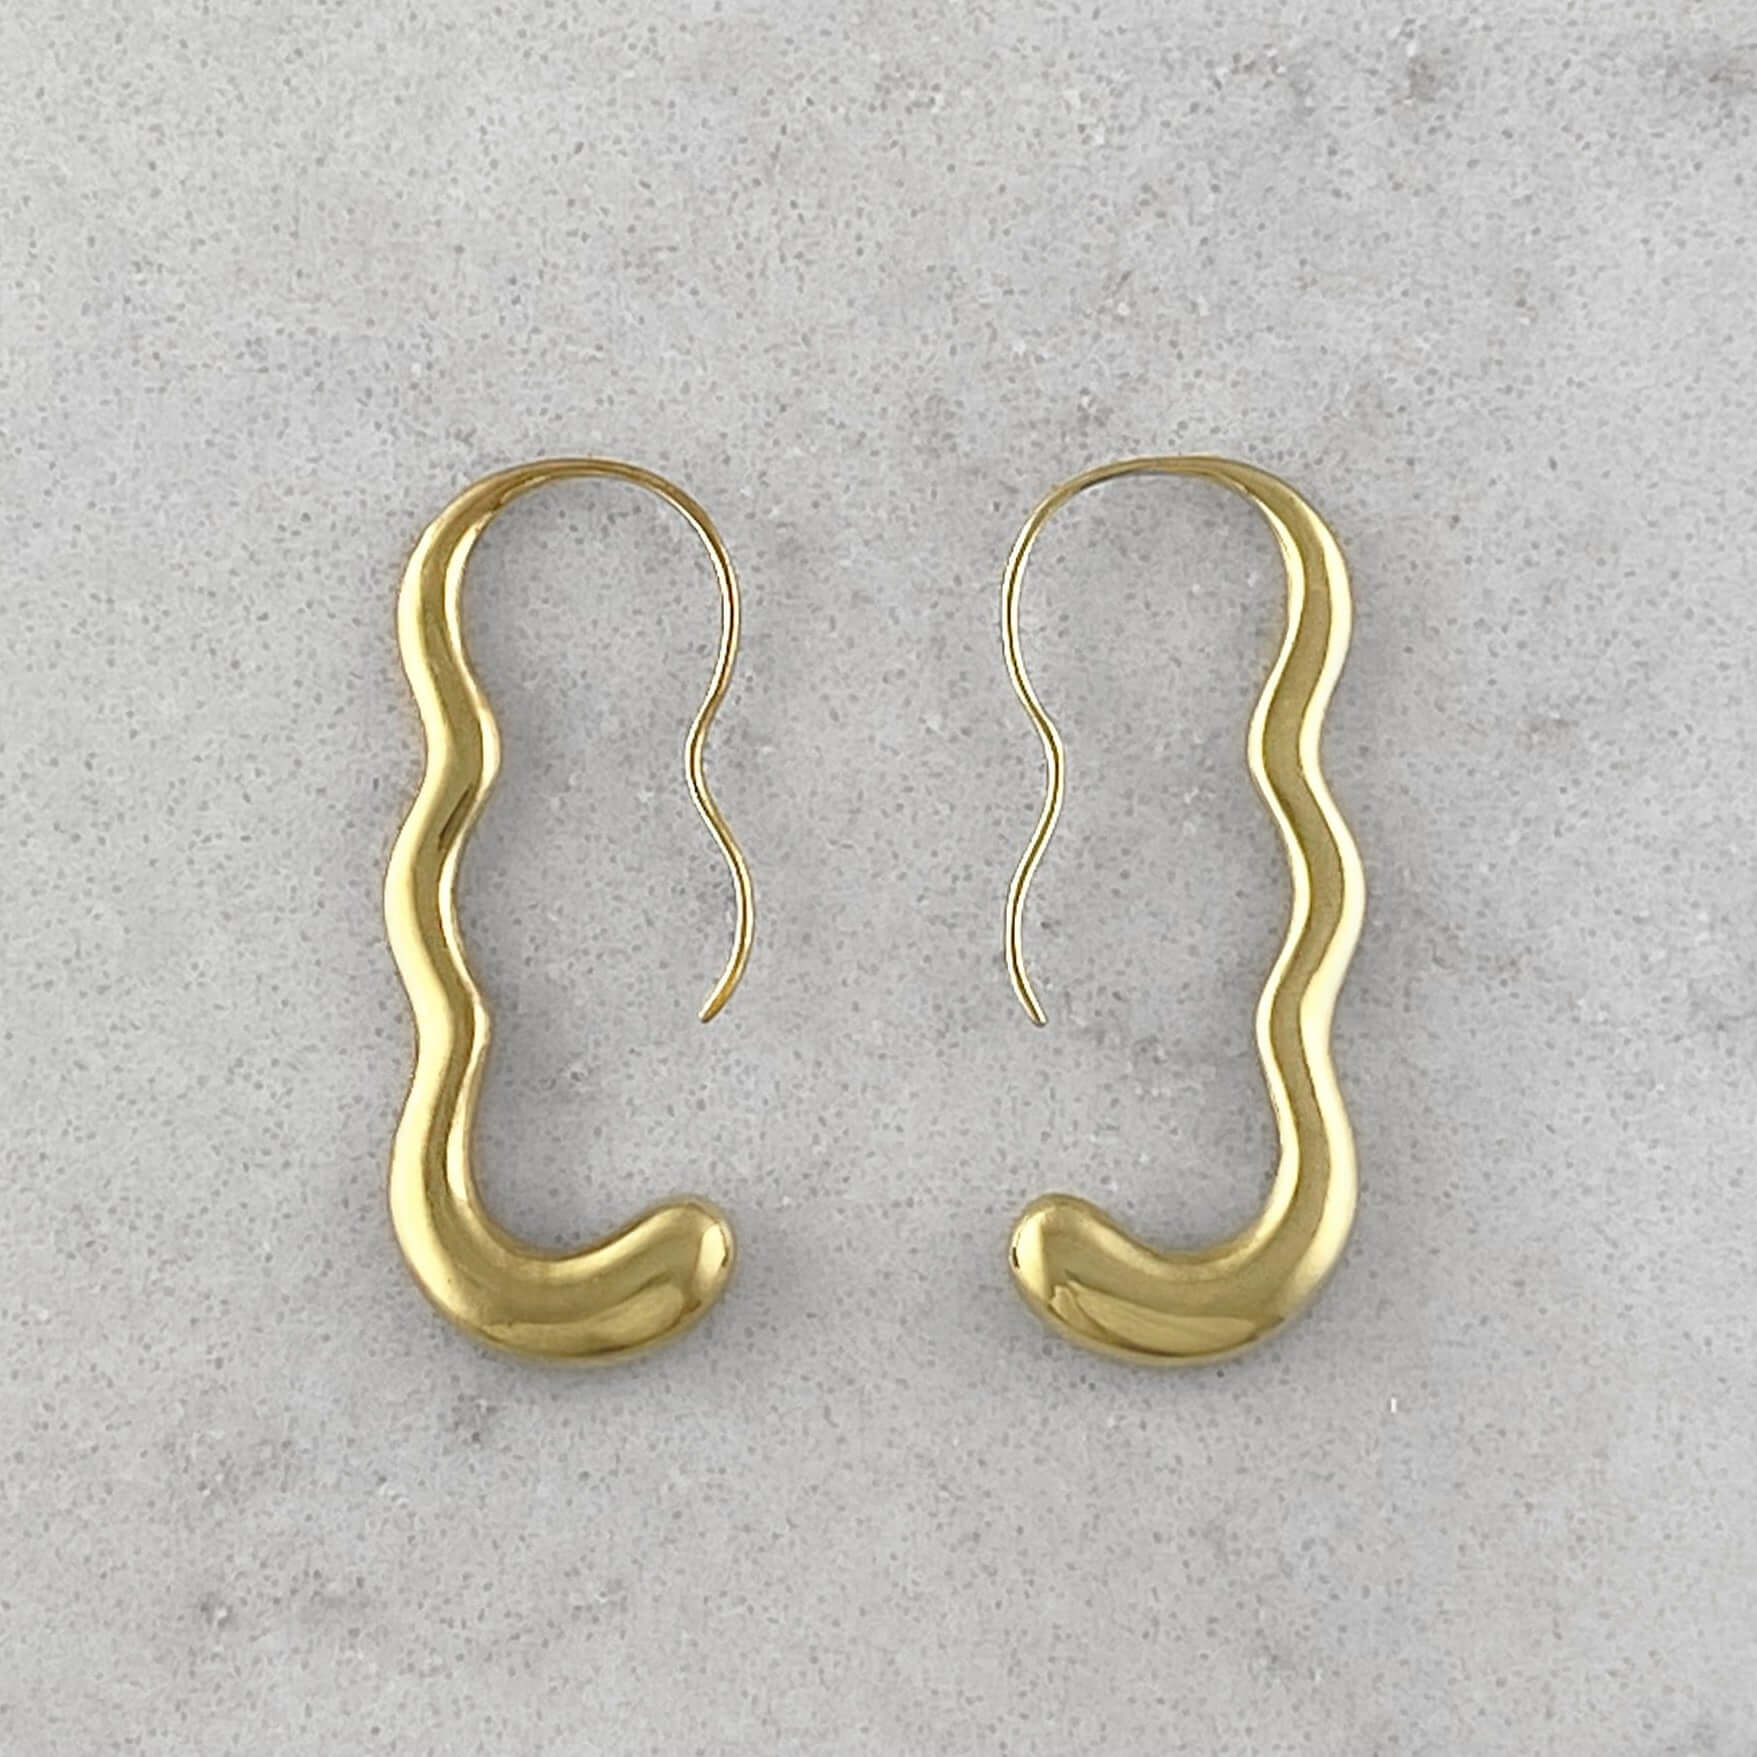 product photo of gold plated earrings by Aur Studio